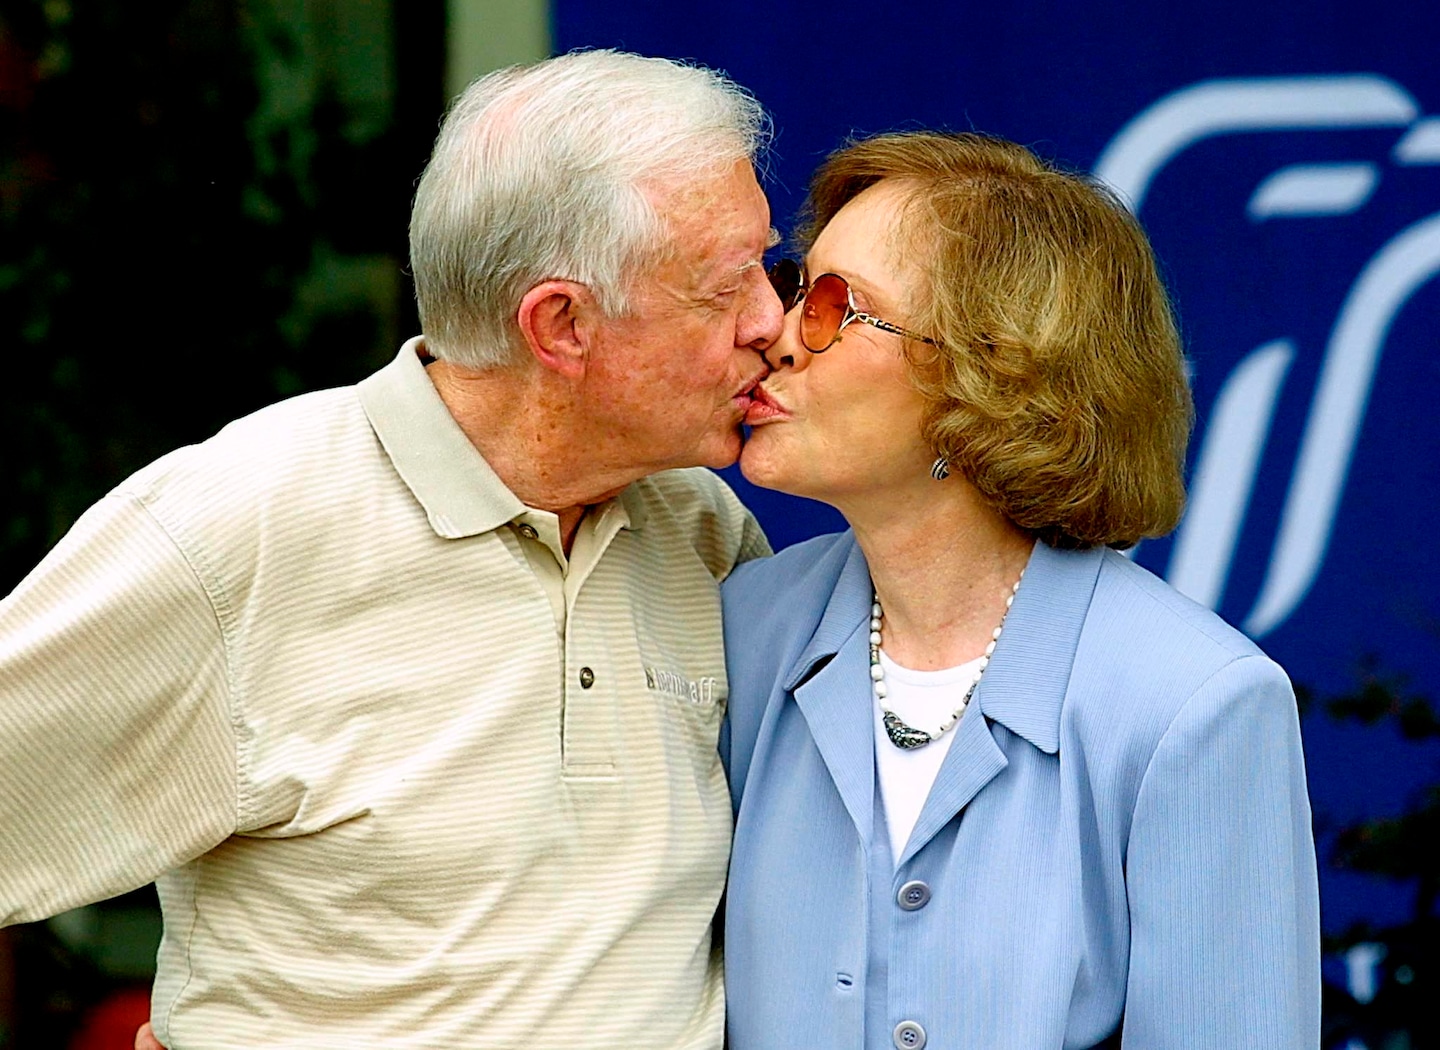 Jimmy Carter’s most exciting moment was ‘when Rosalynn said she’d marry me’